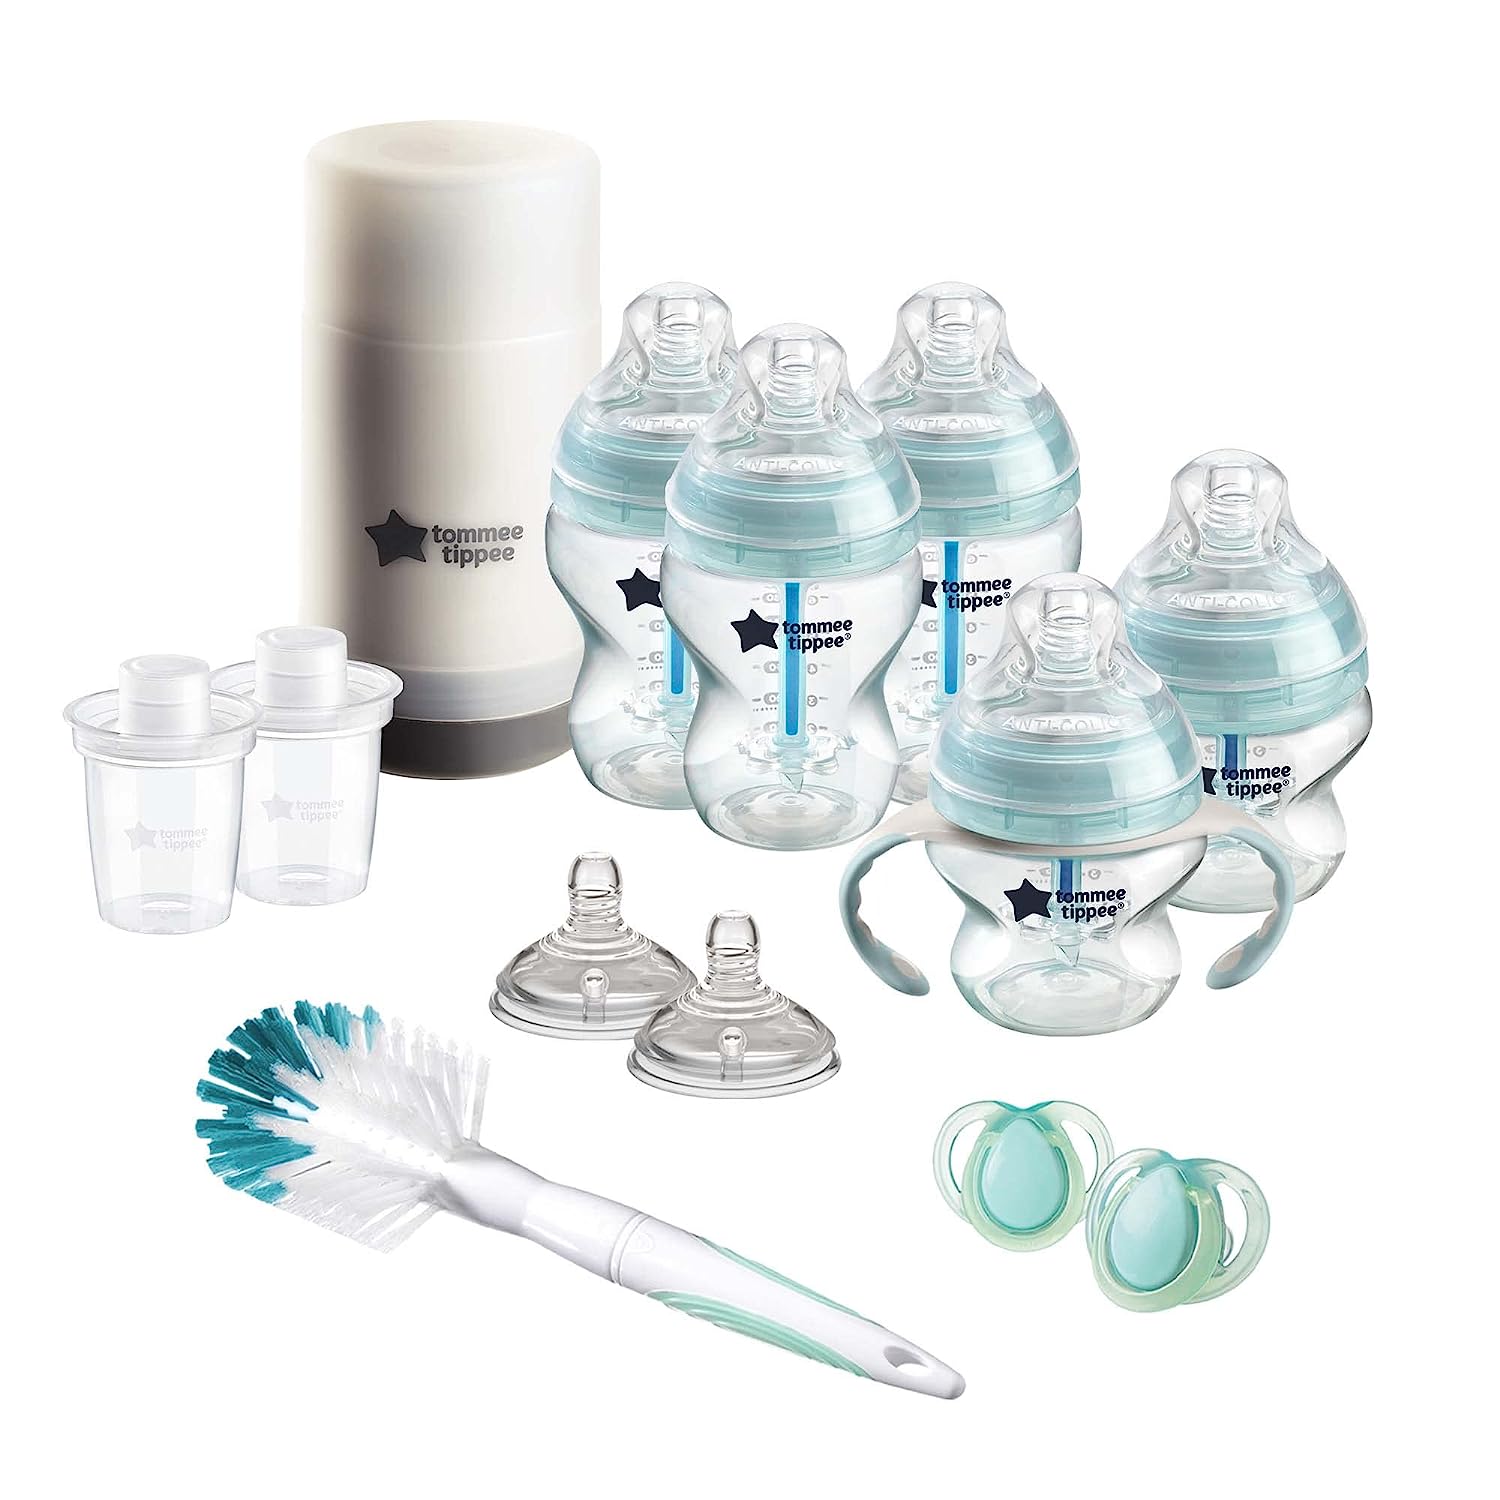 Tommee Tippee Advanced Anti-Colic Newborn Baby Bottle Feeding Set $31 + Free Shipping w/ Prime or on $35+